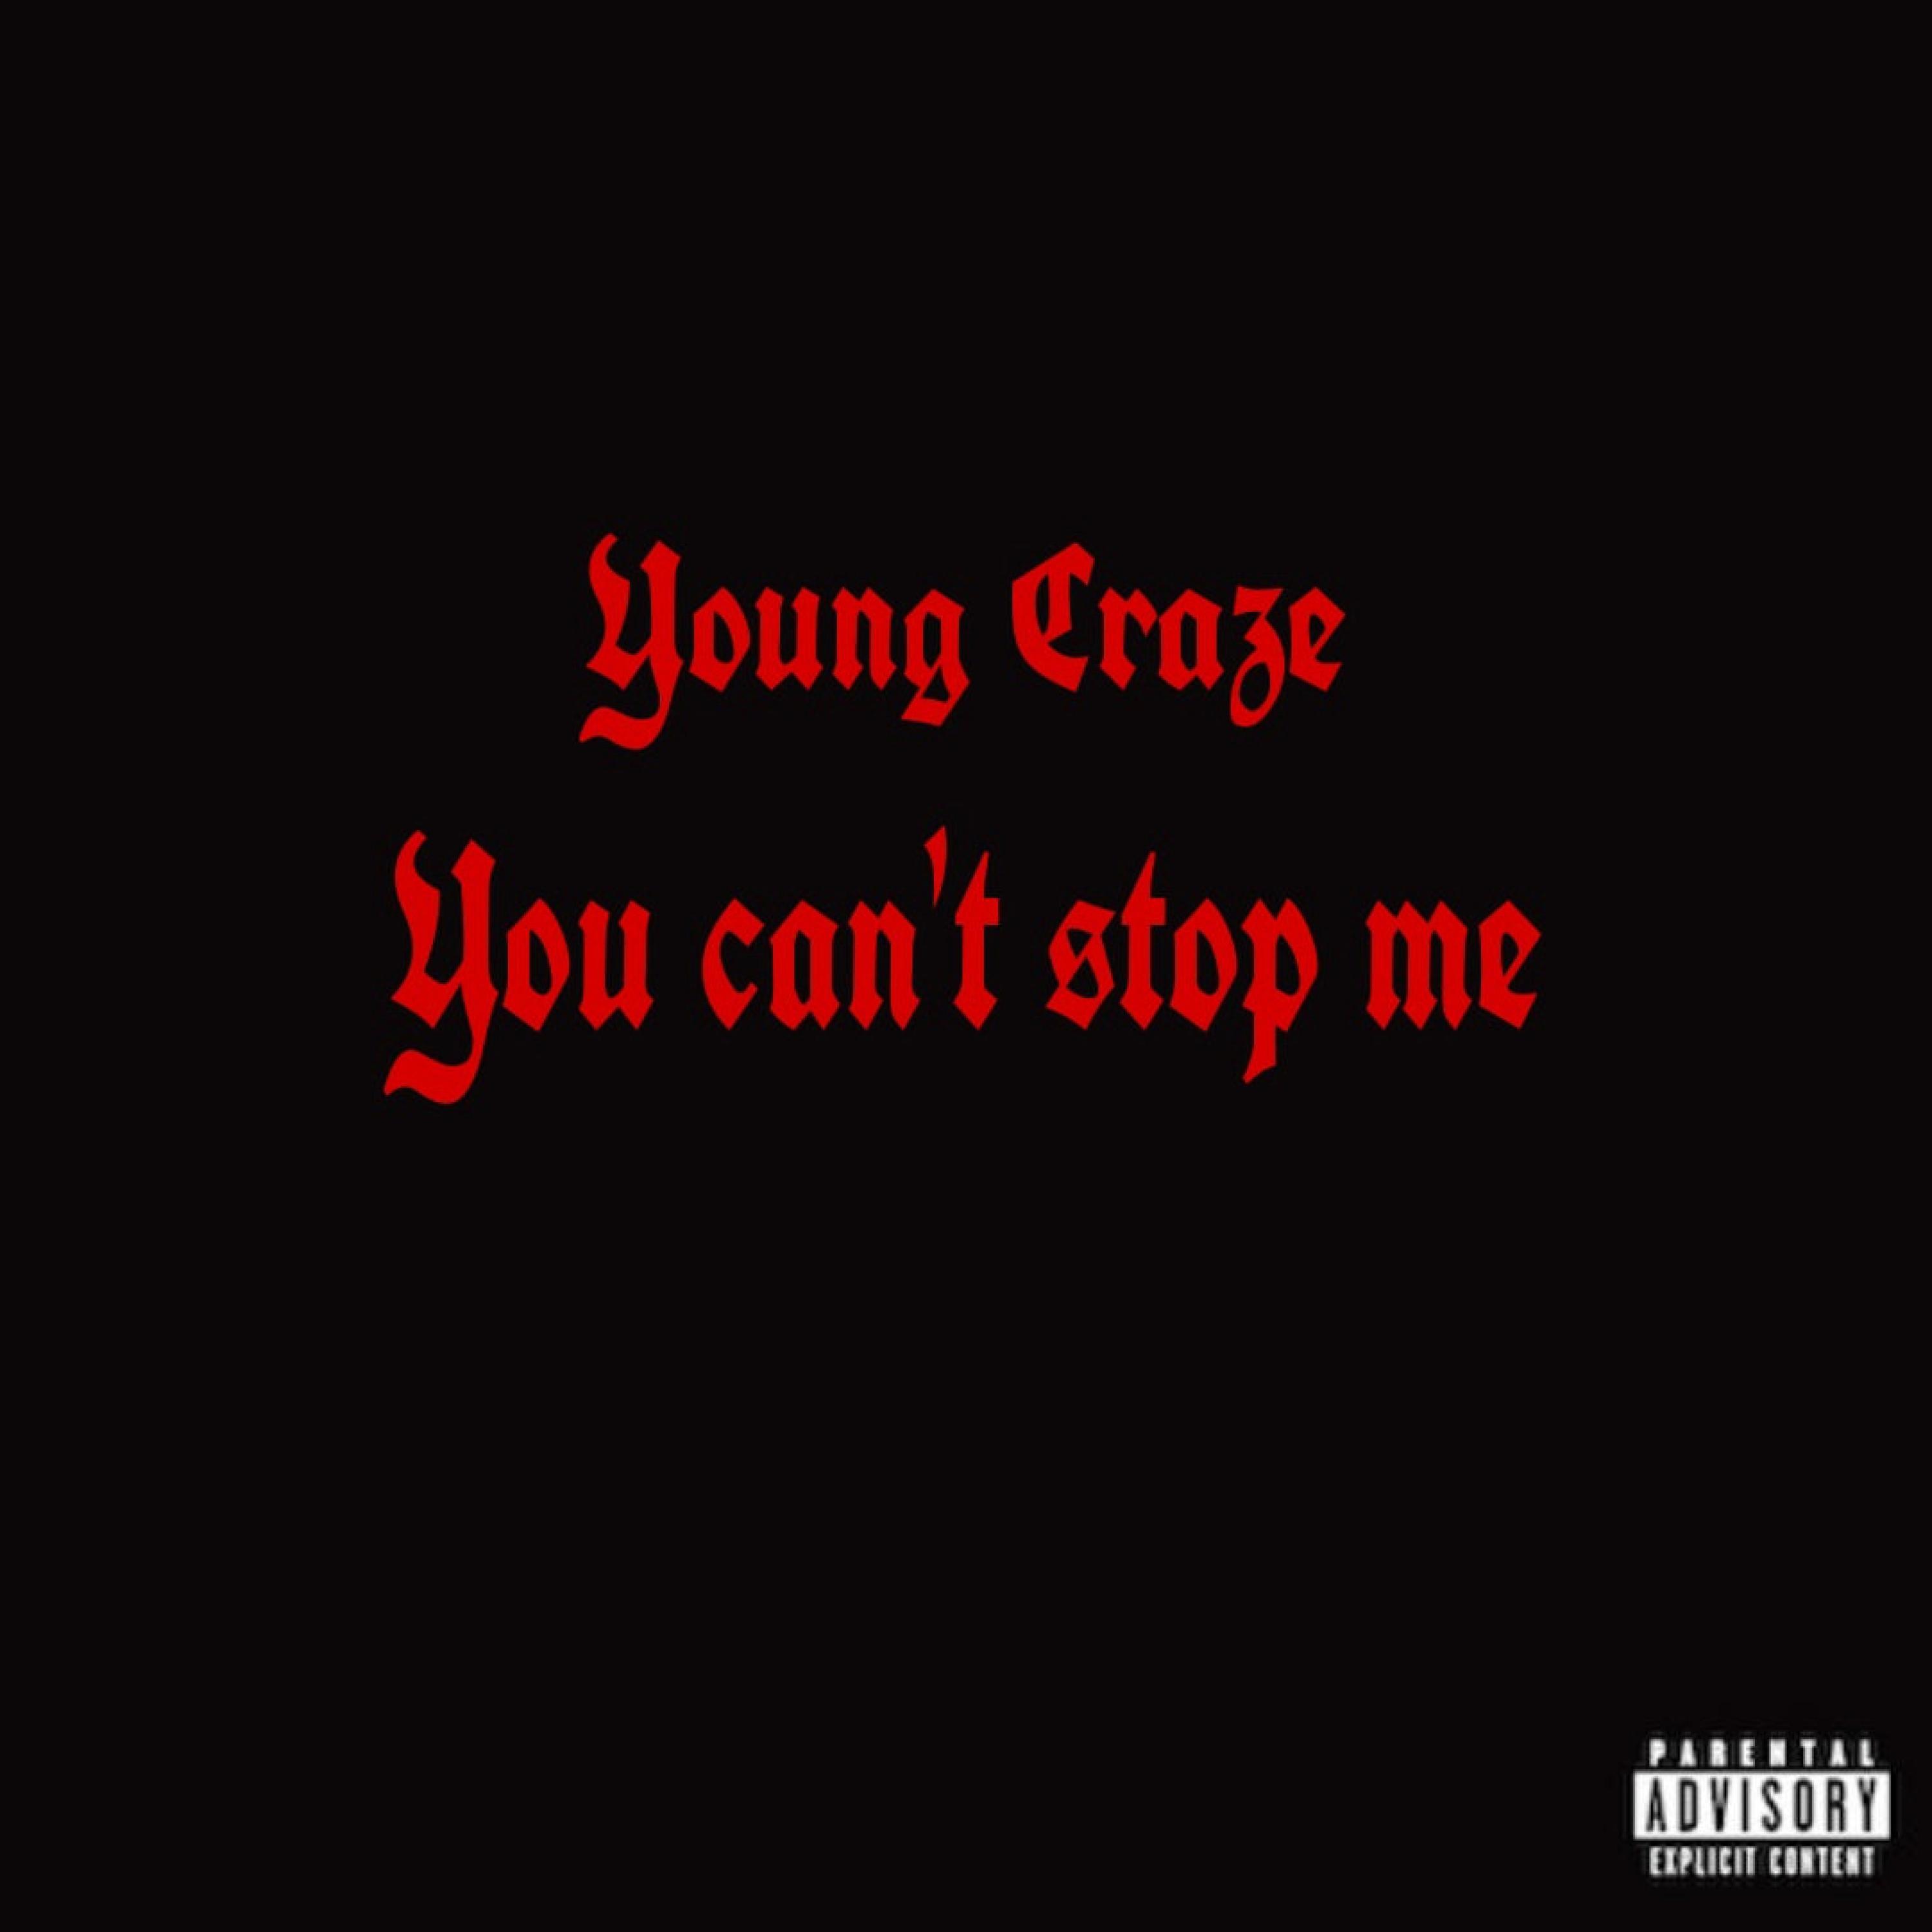 Young Craze - You can't stop me